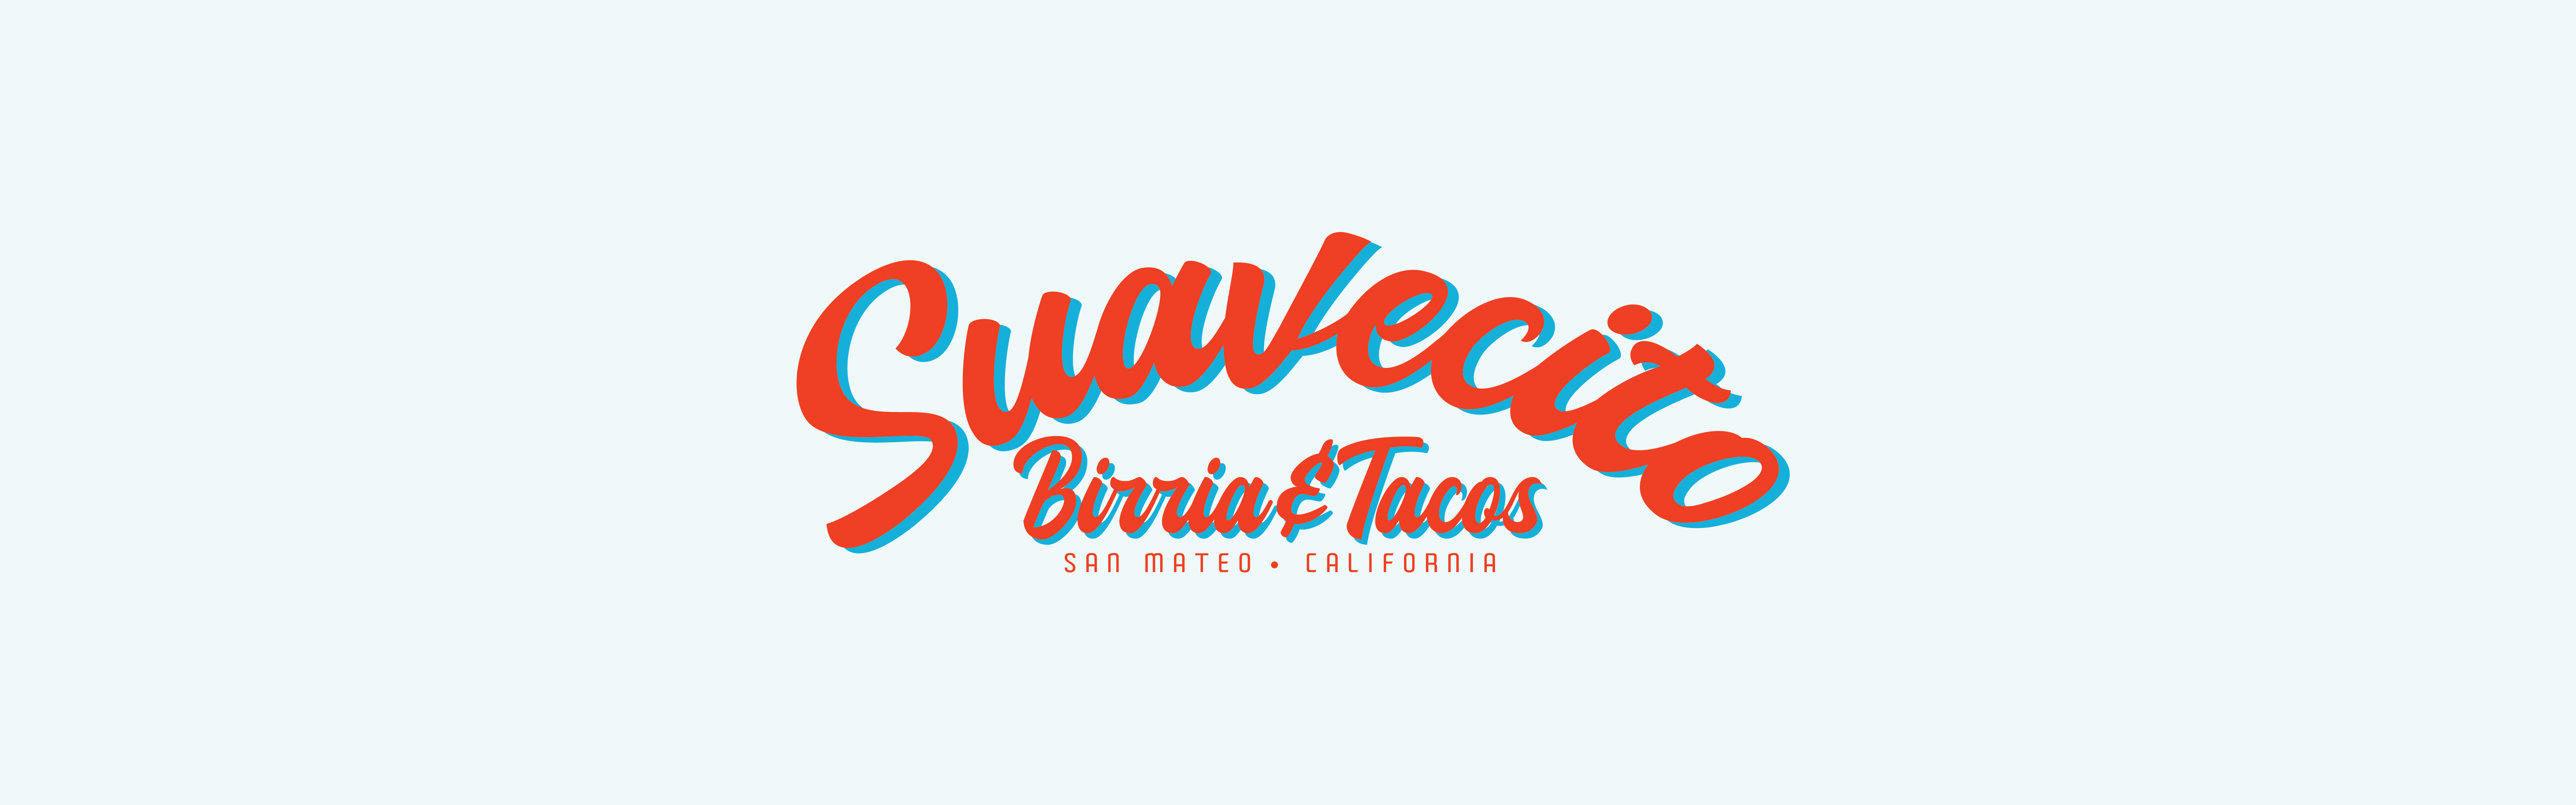 Logo of "Squaletto's Birria & Tacos Chaos" in stylized red and blue font on a plain background, indicating a food establishment located in San Mateo, California.